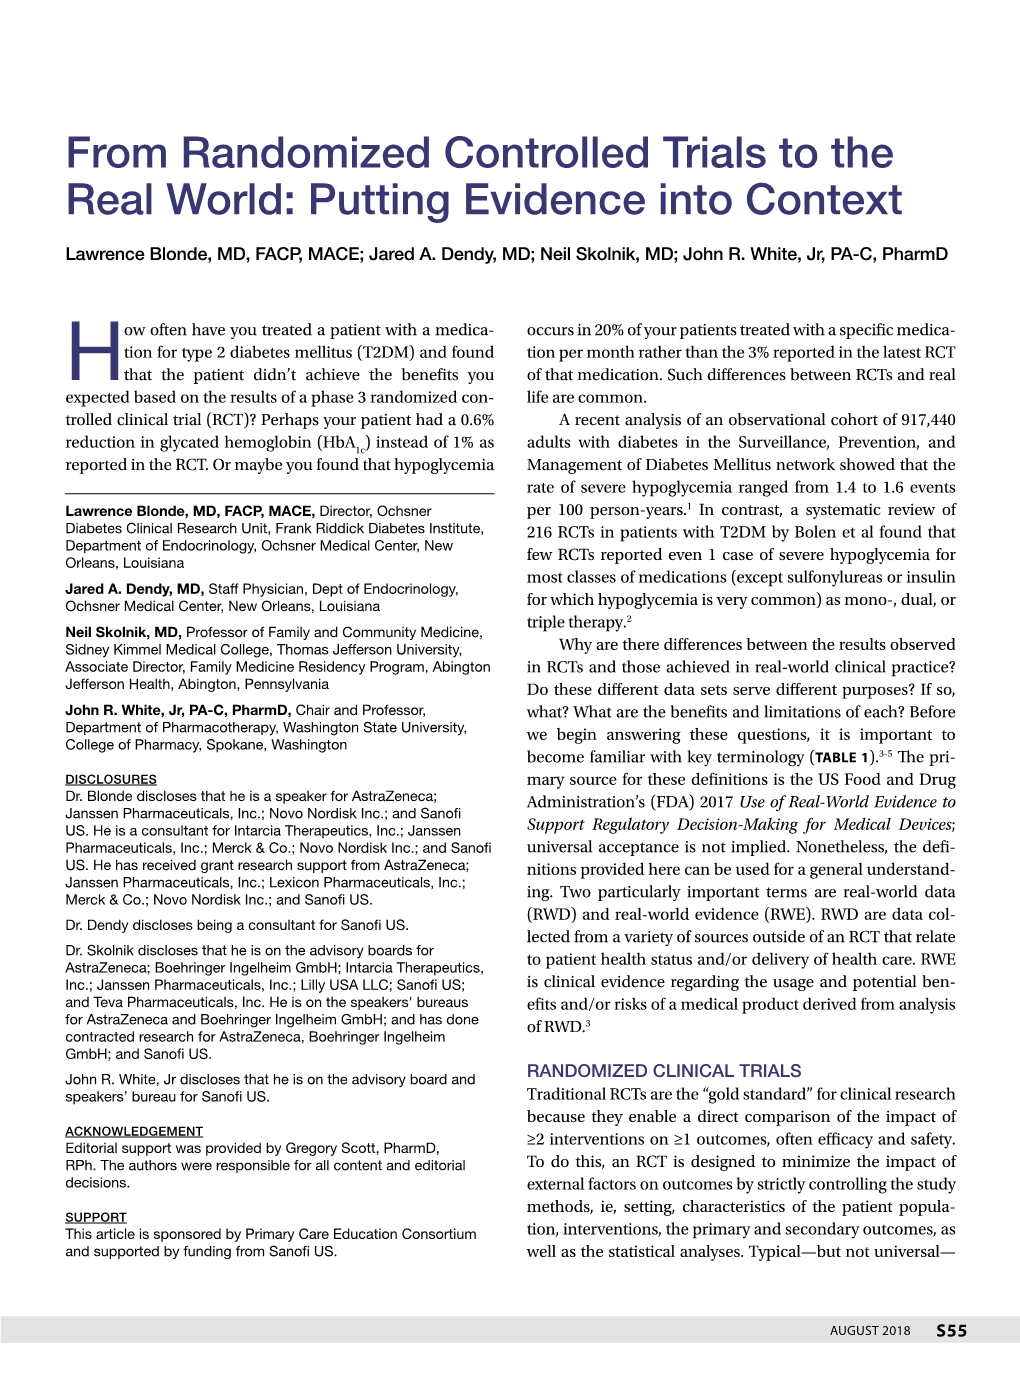 From Randomized Controlled Trials to the Real World: Putting Evidence Into Context